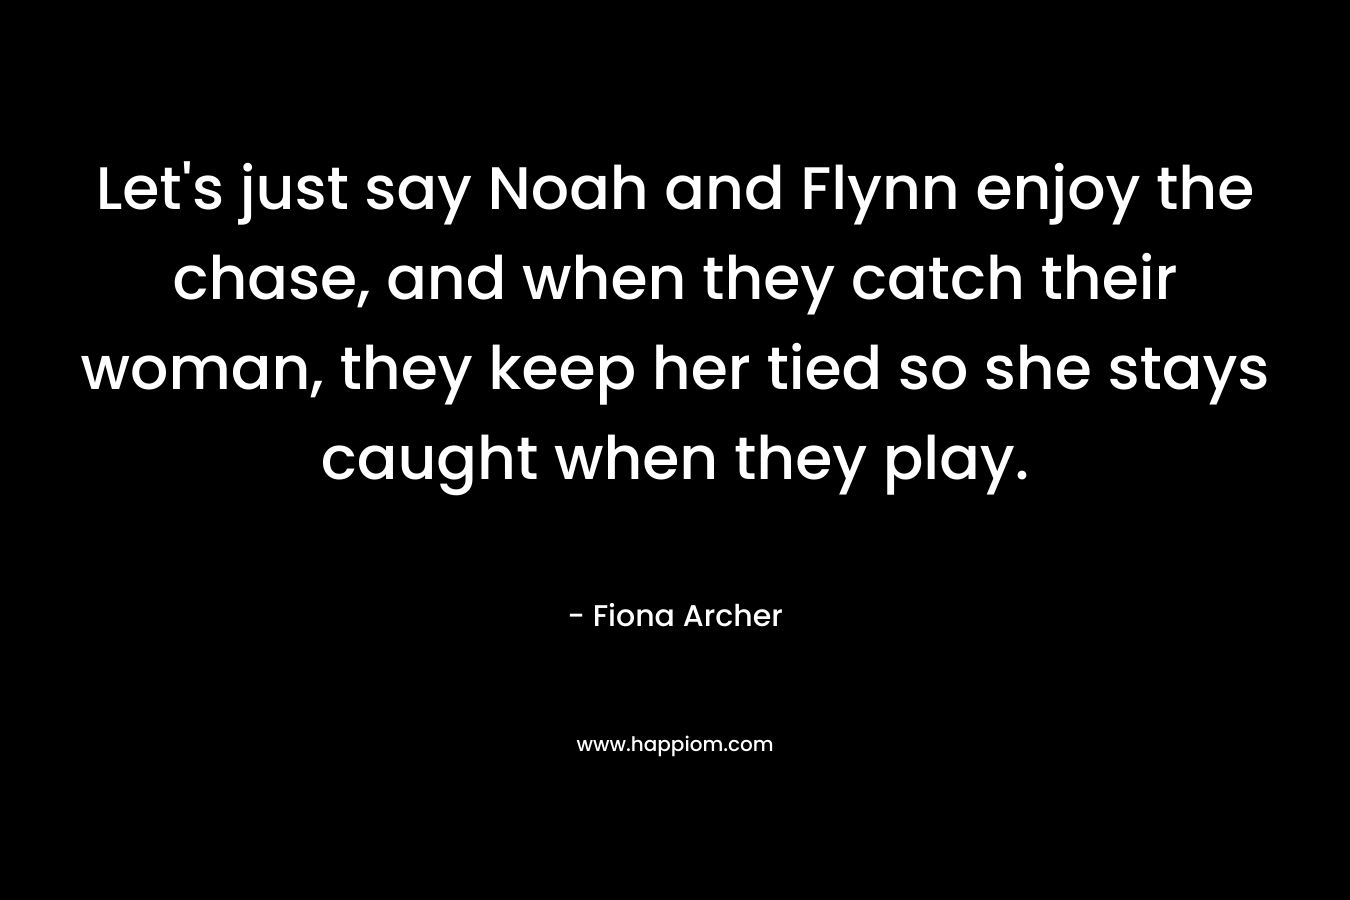 Let’s just say Noah and Flynn enjoy the chase, and when they catch their woman, they keep her tied so she stays caught when they play. – Fiona Archer